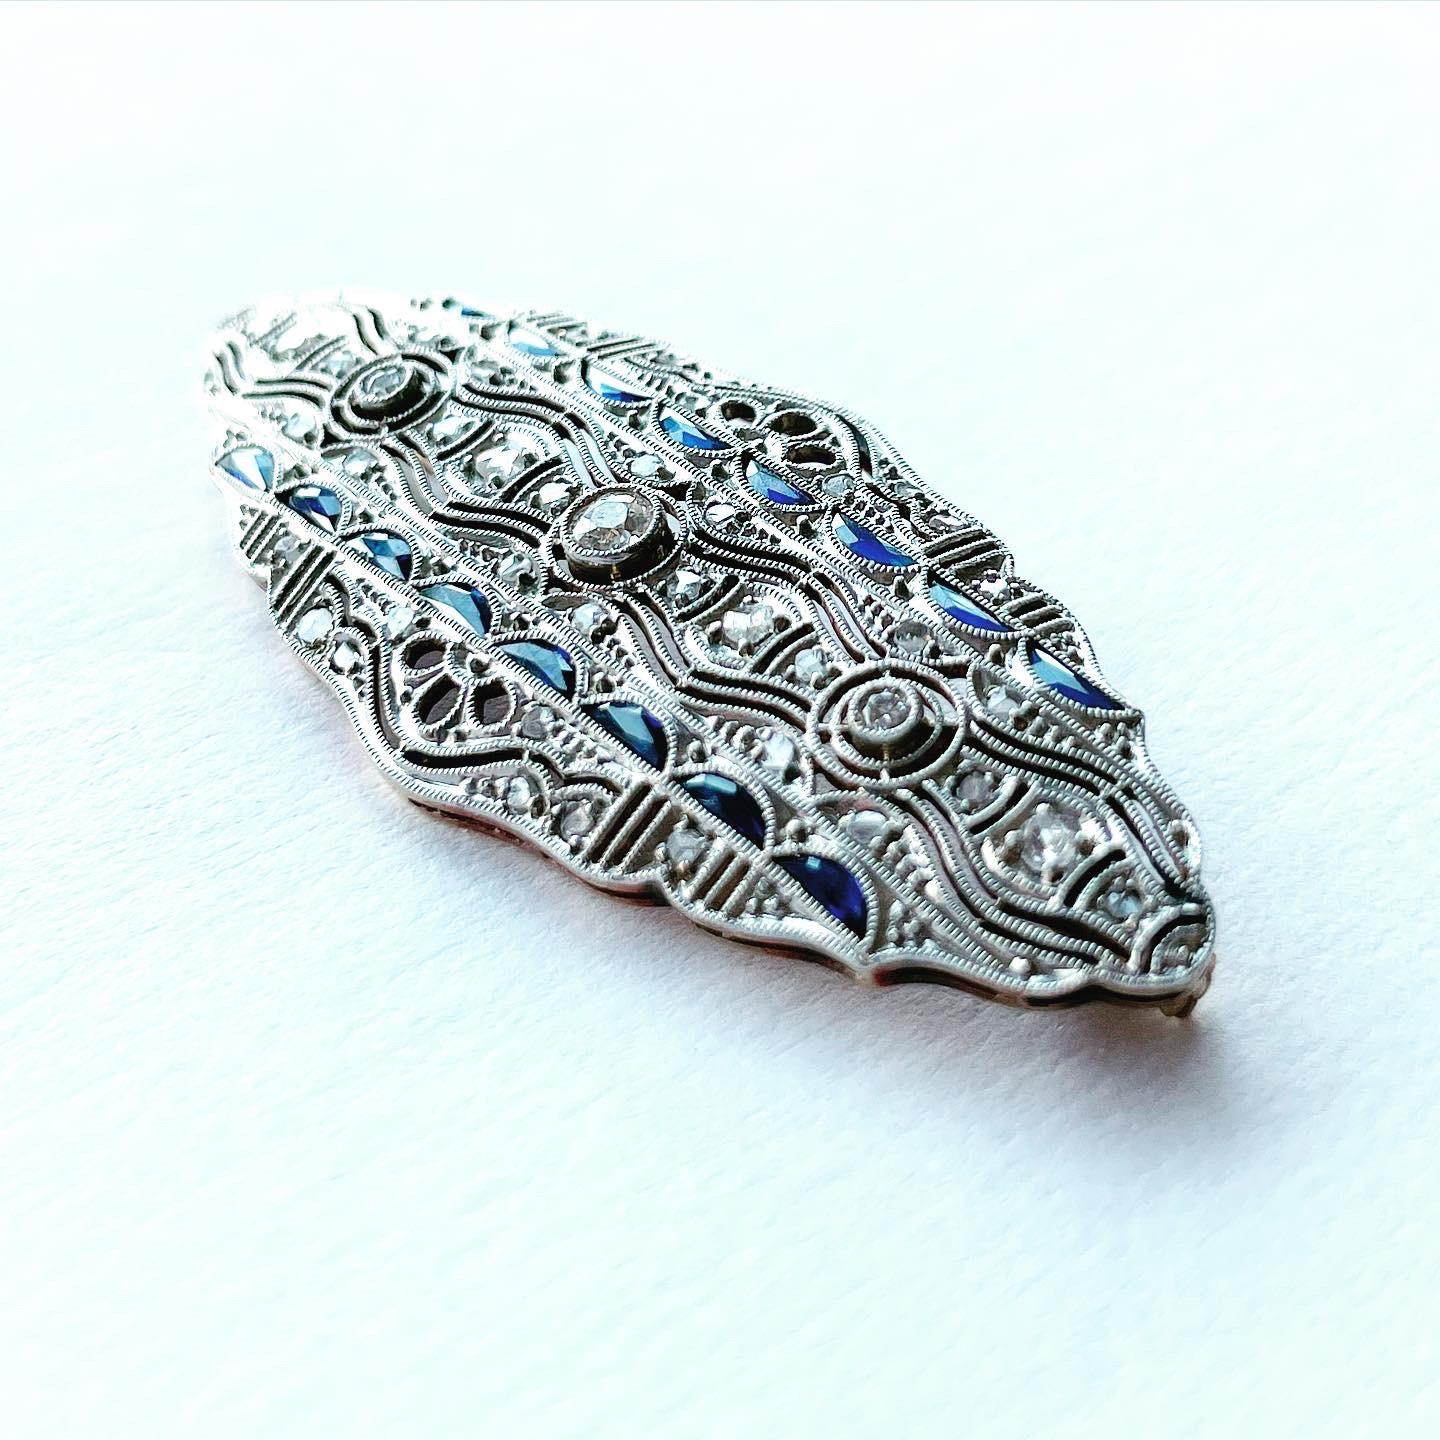 This Art Deco diamond and sapphire brooch is the epitome of Deco style. The symmetry, the geometry, antique diamonds and sapphires, everything about this brooch is what Art Deco jewelry is known. 

The brooch features 3 old European cut diamonds